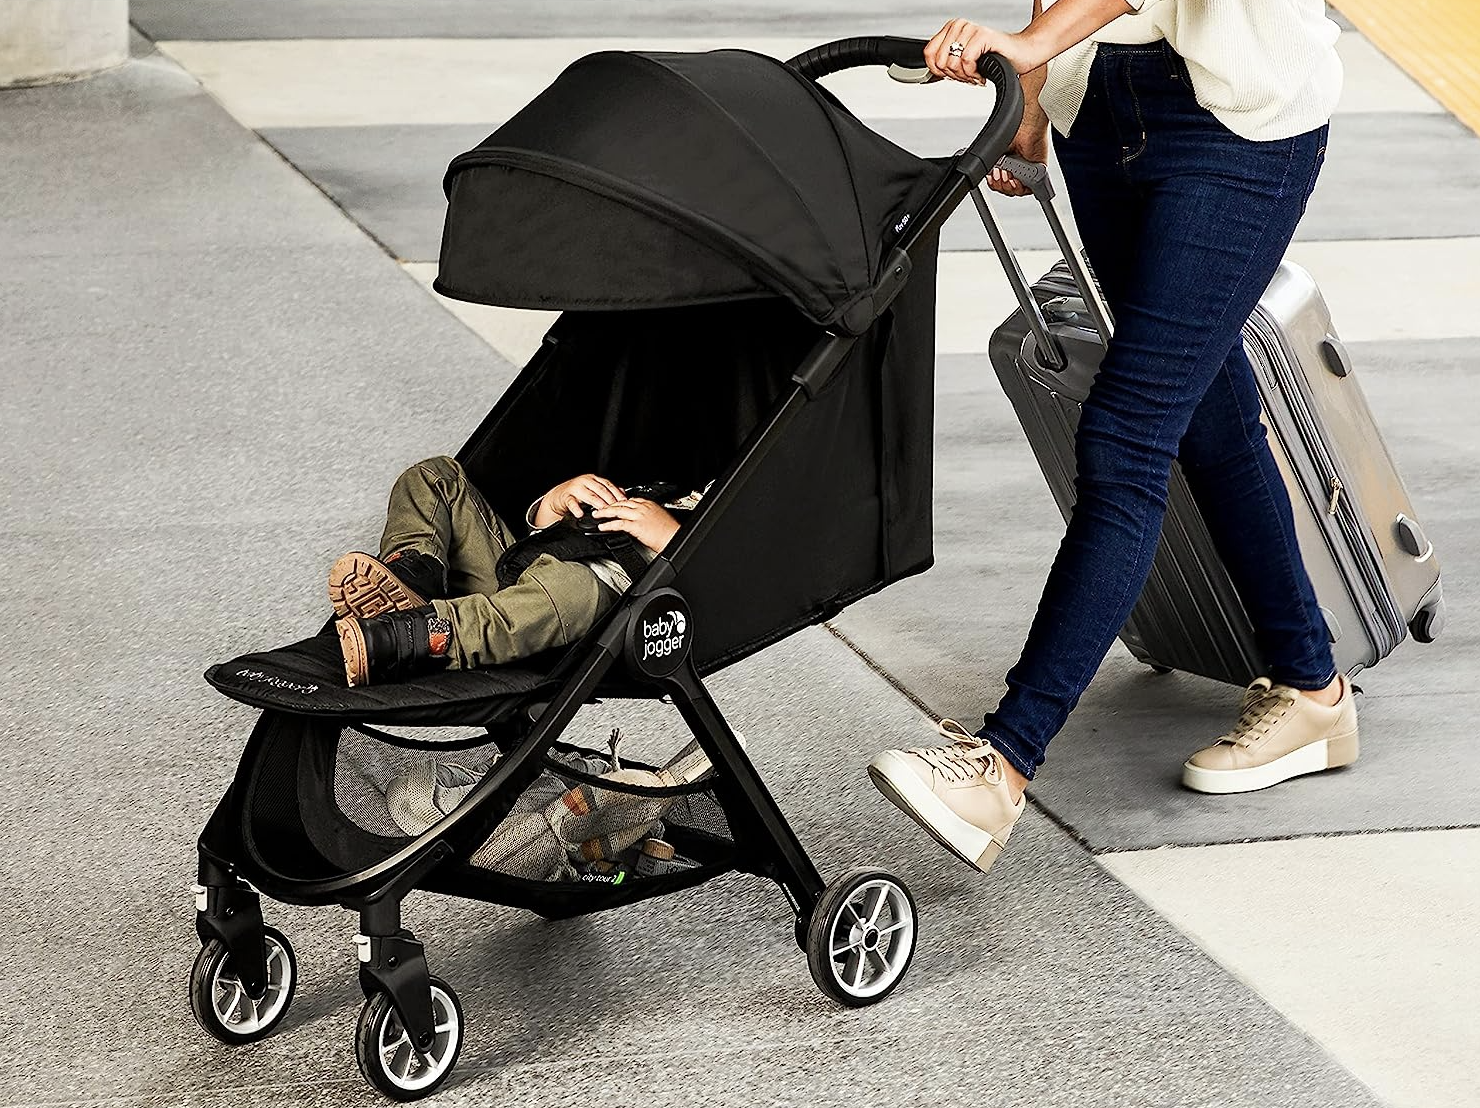 parent pushing child in stroller while pulling suitcase